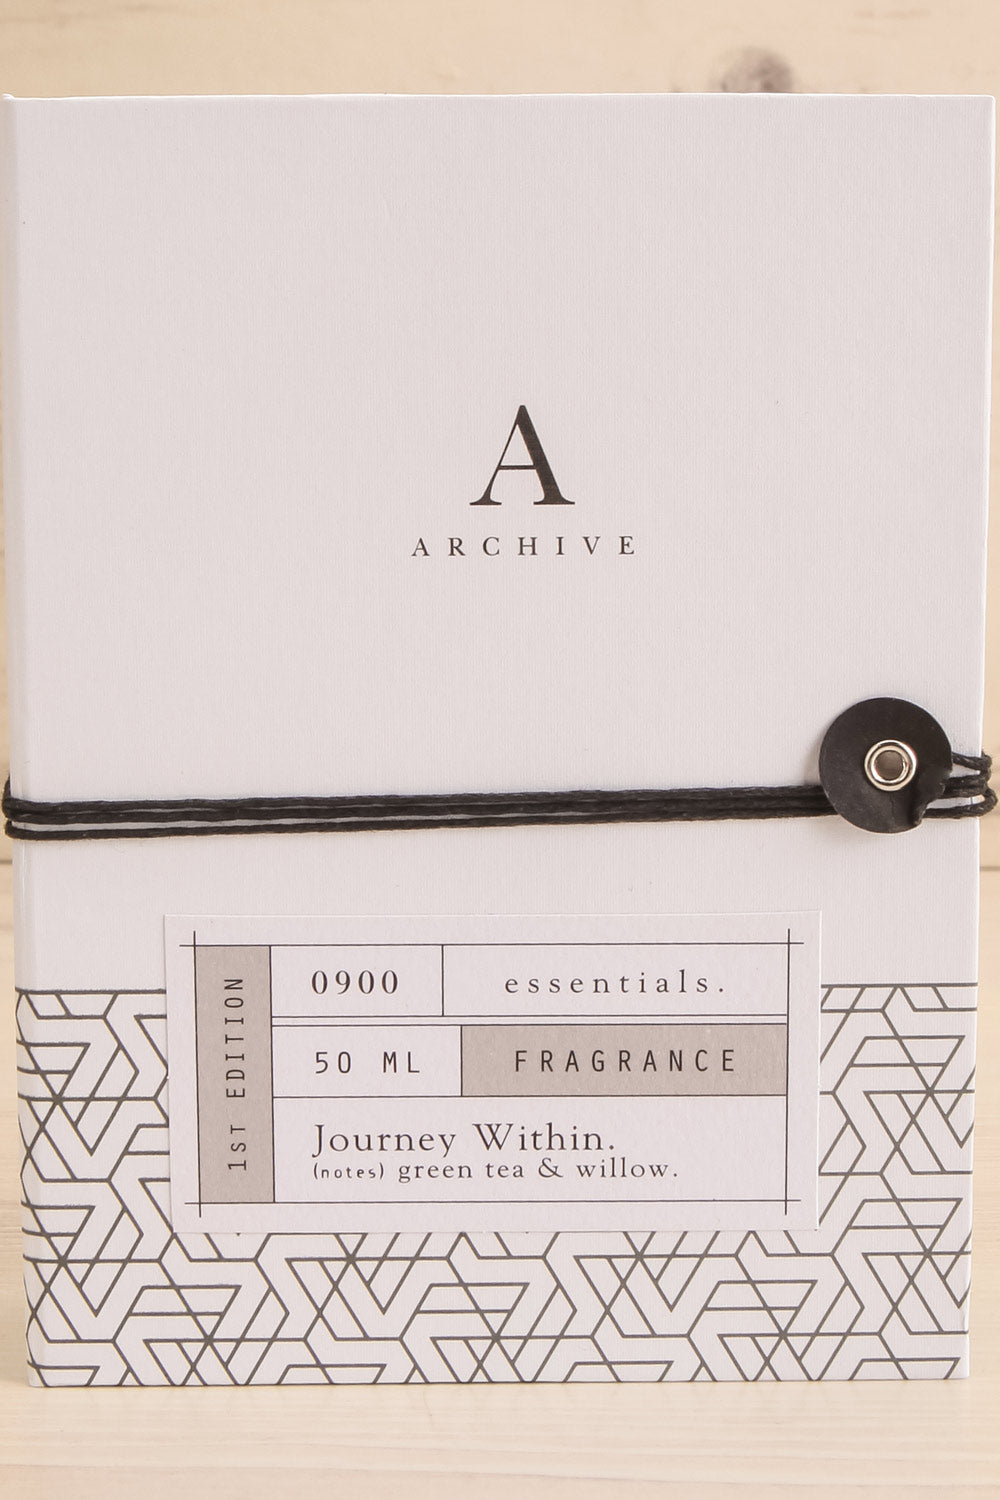 Archive Fragrance Journey Within 50 ml